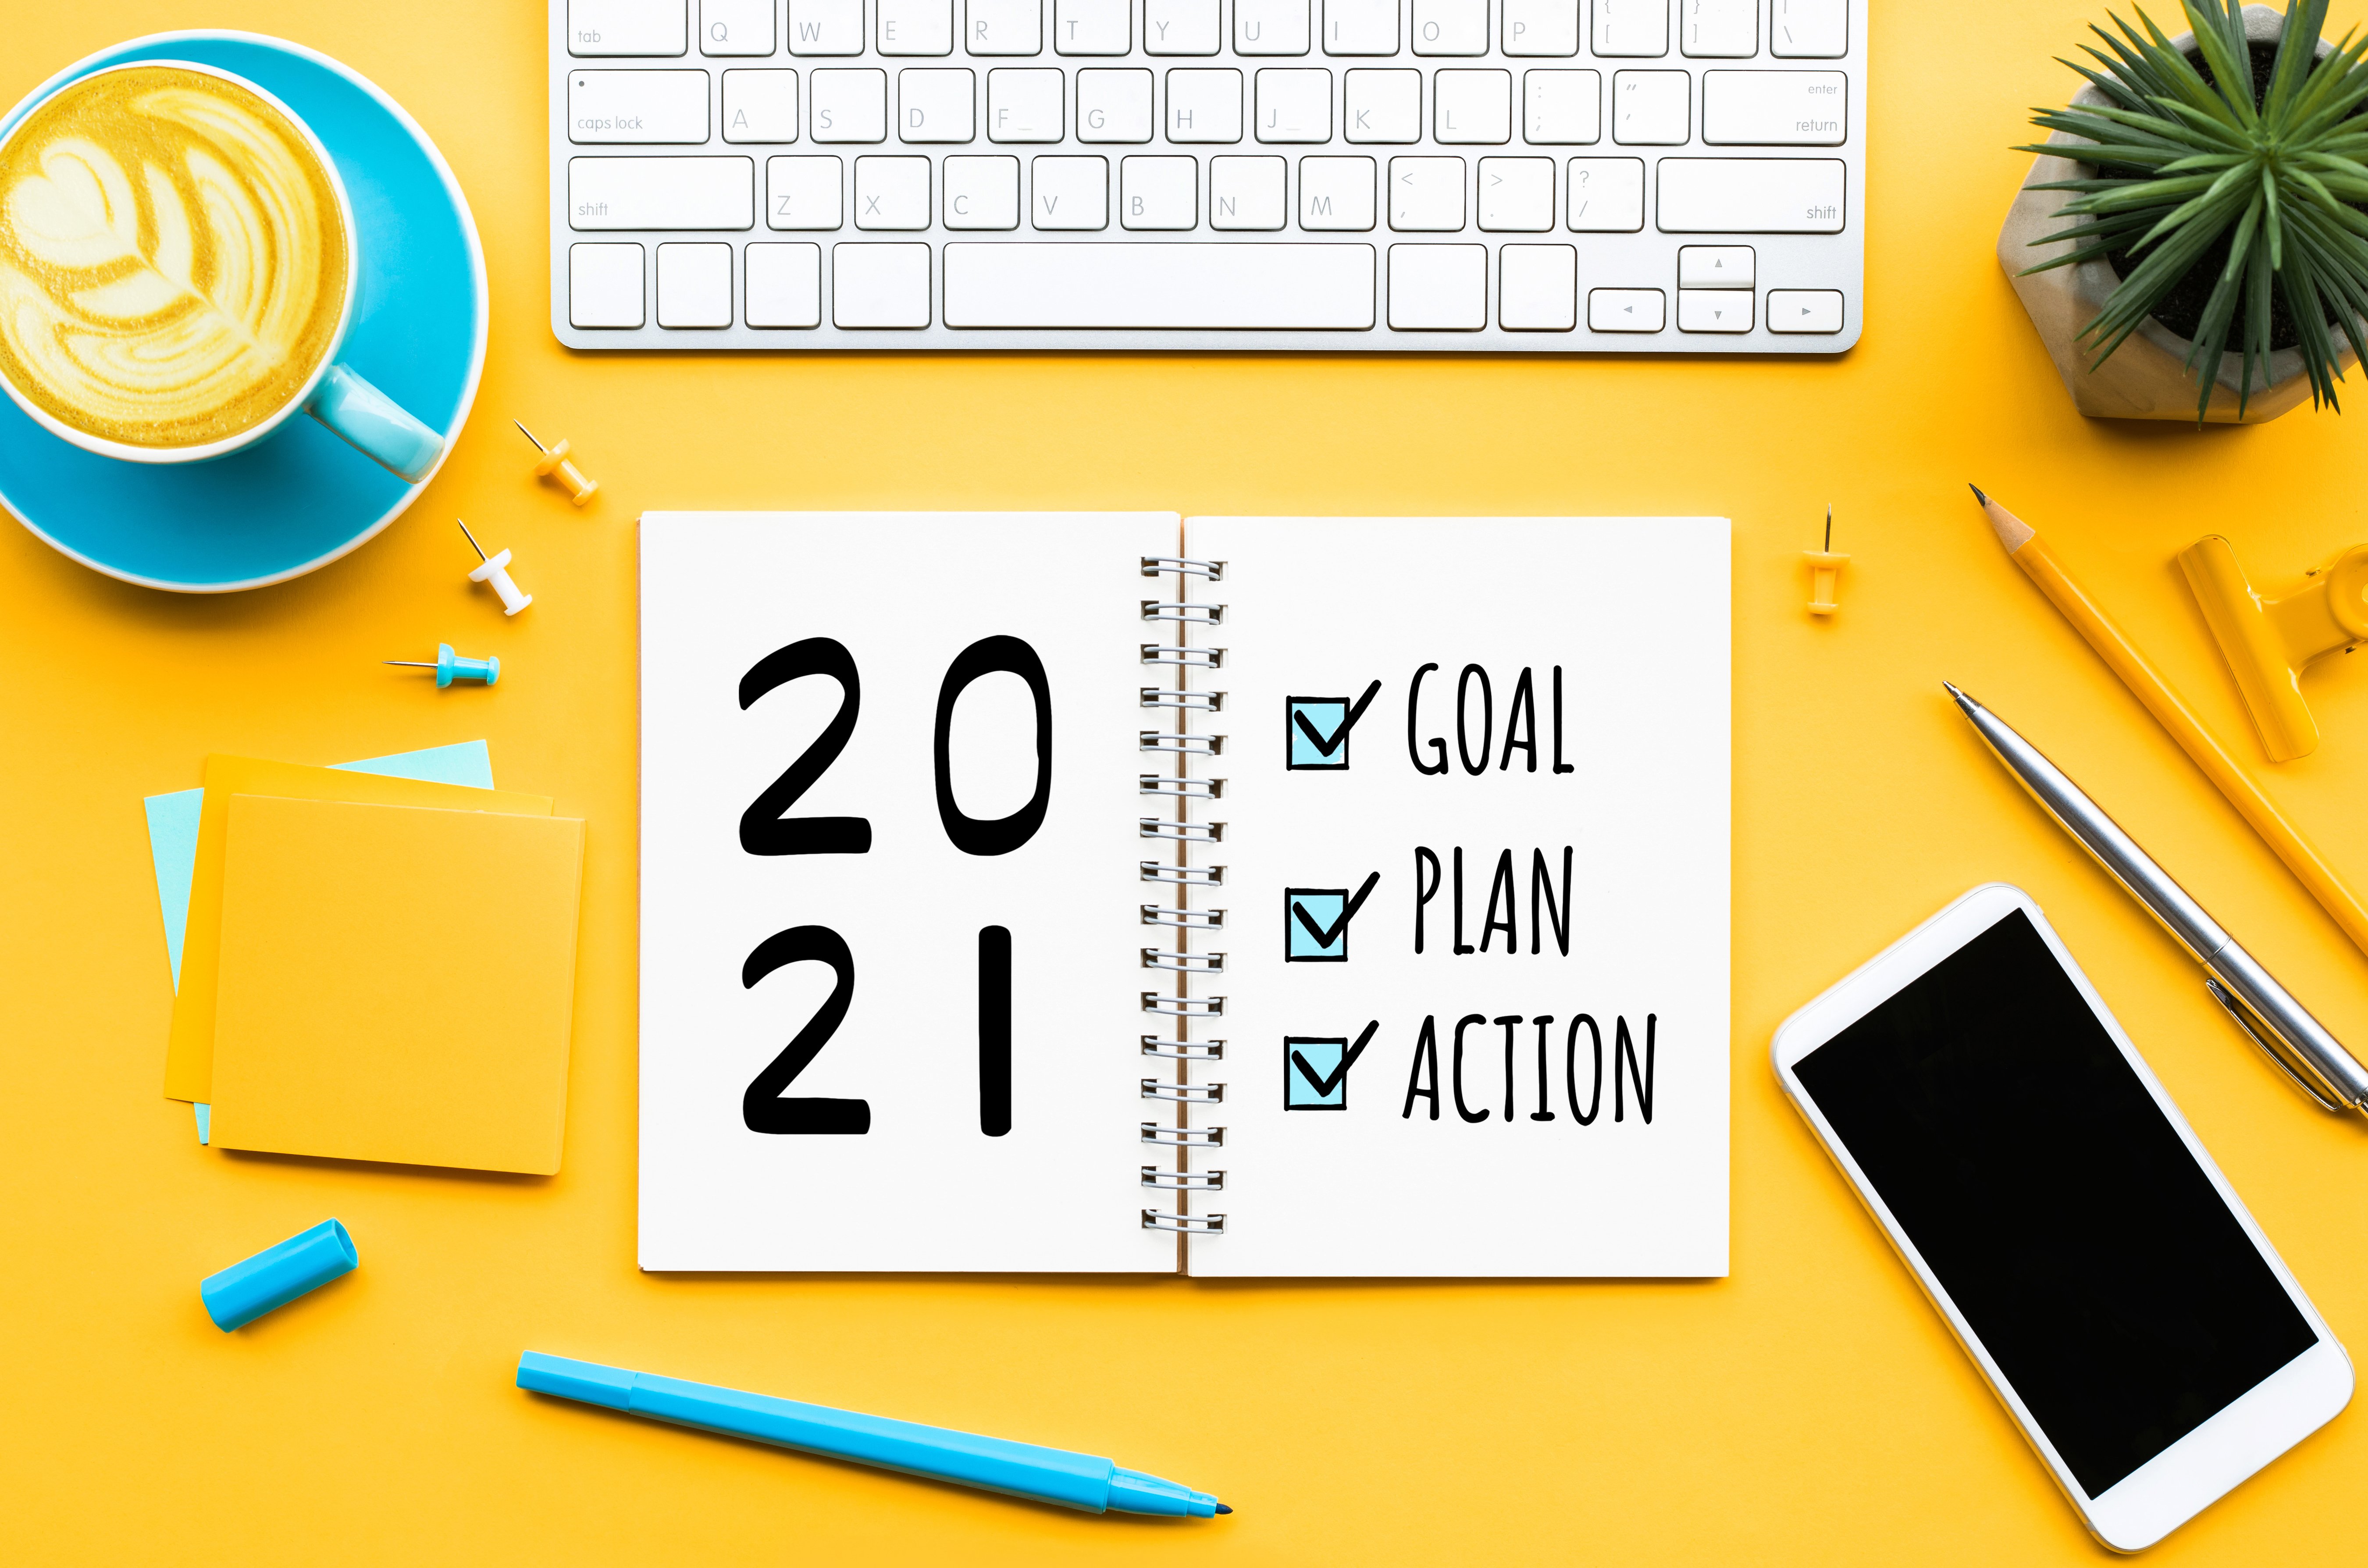 4 New Year's Resolutions Every Marketer Should Make for 2021